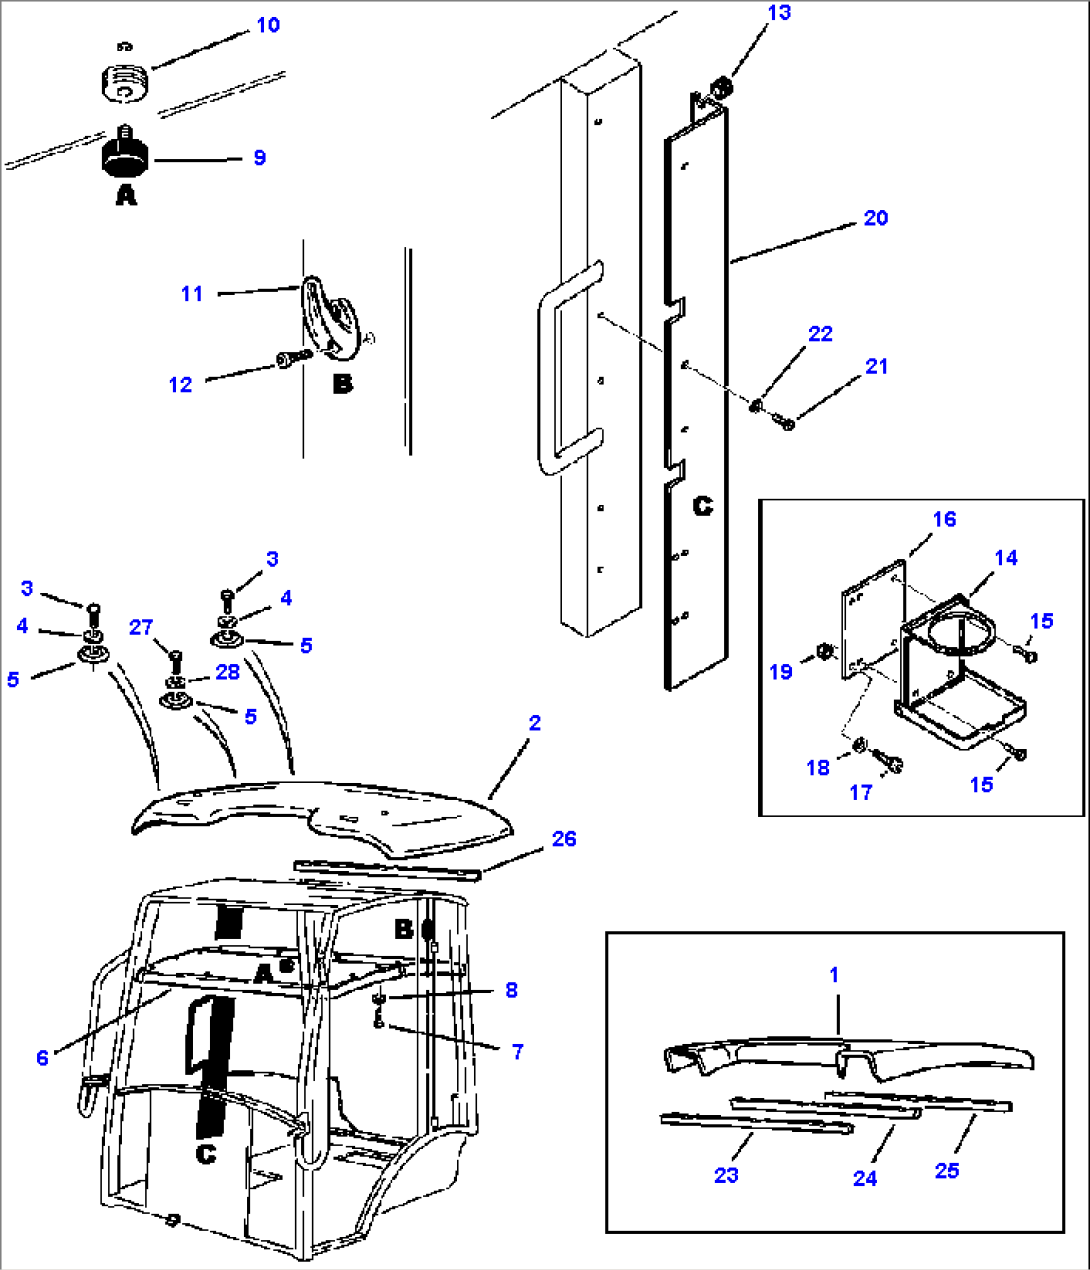 FIG. K5206-01A0 CAB - ROOF AND INTERNAL PARTS